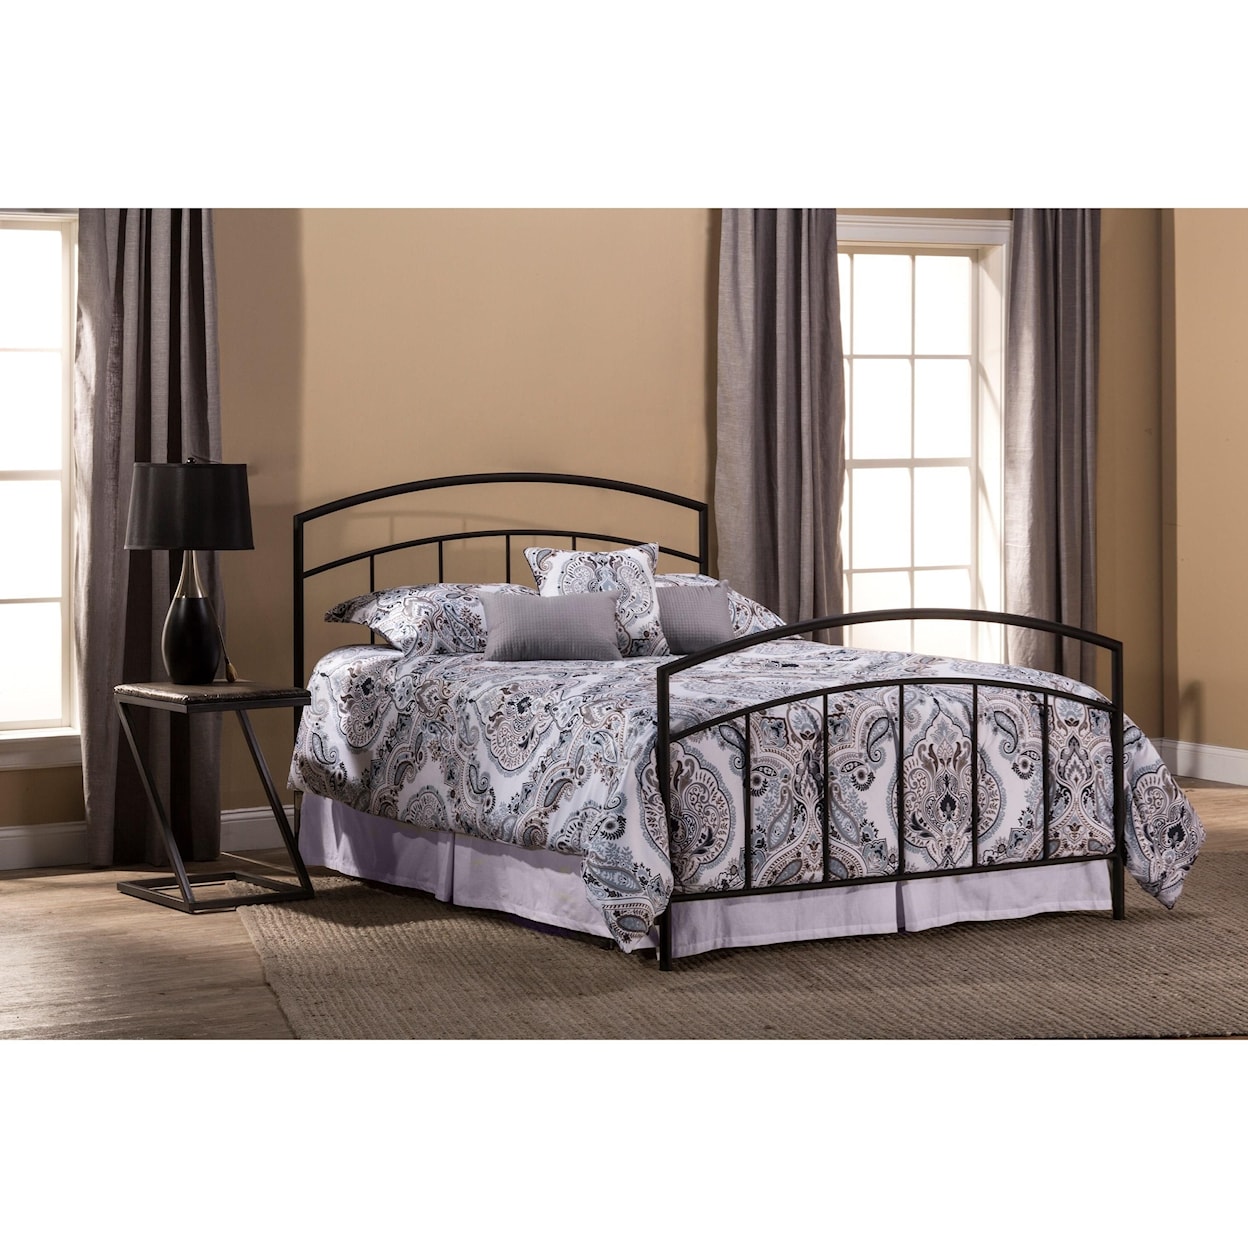 Hillsdale Metal Beds Full Bed Set with Rails